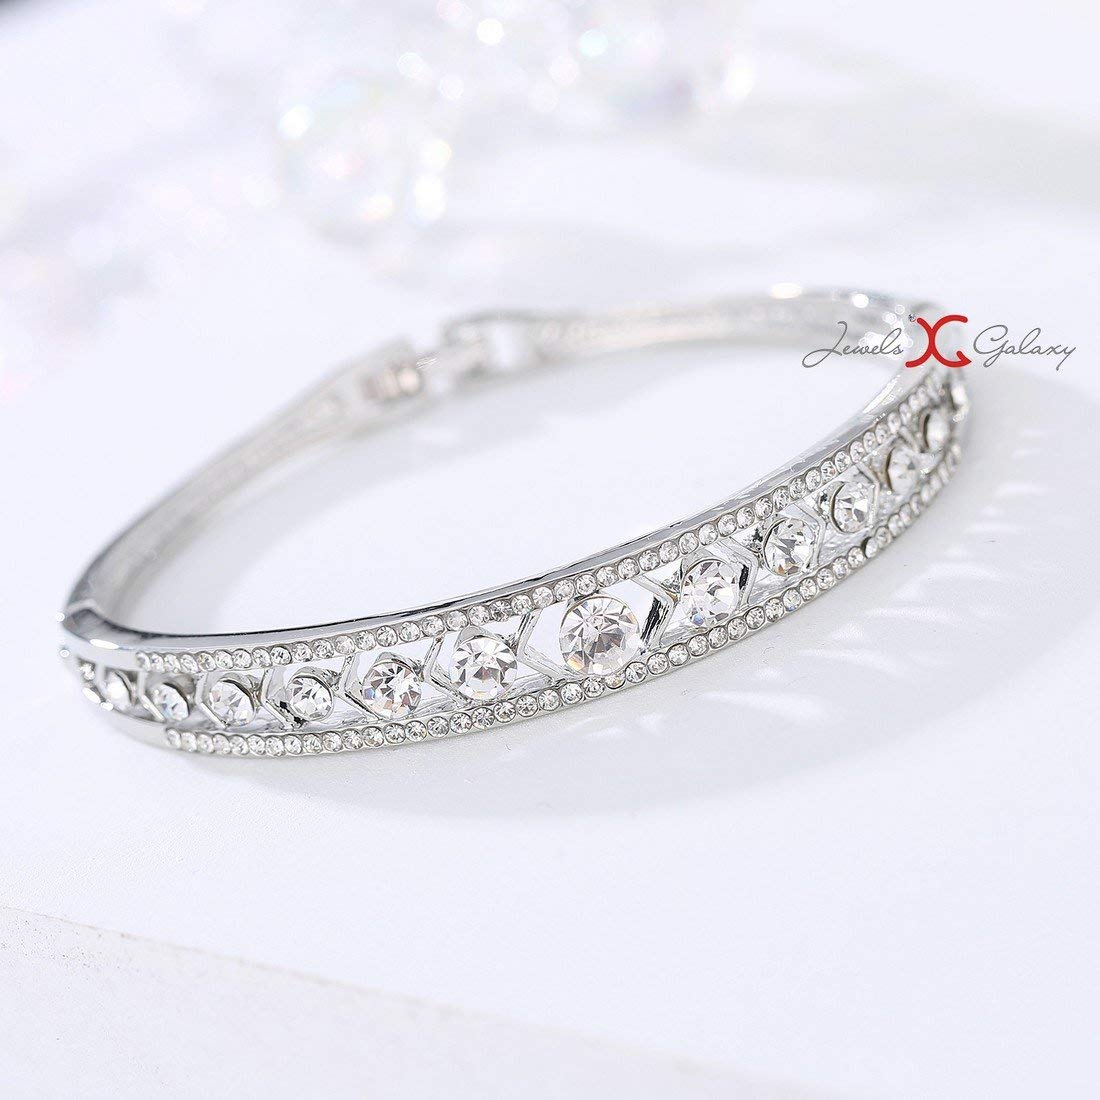 s999 bracelet silver opening diamond smooth foot silver bracelet send  girlfriend send wife send mother holiday gift - AliExpress